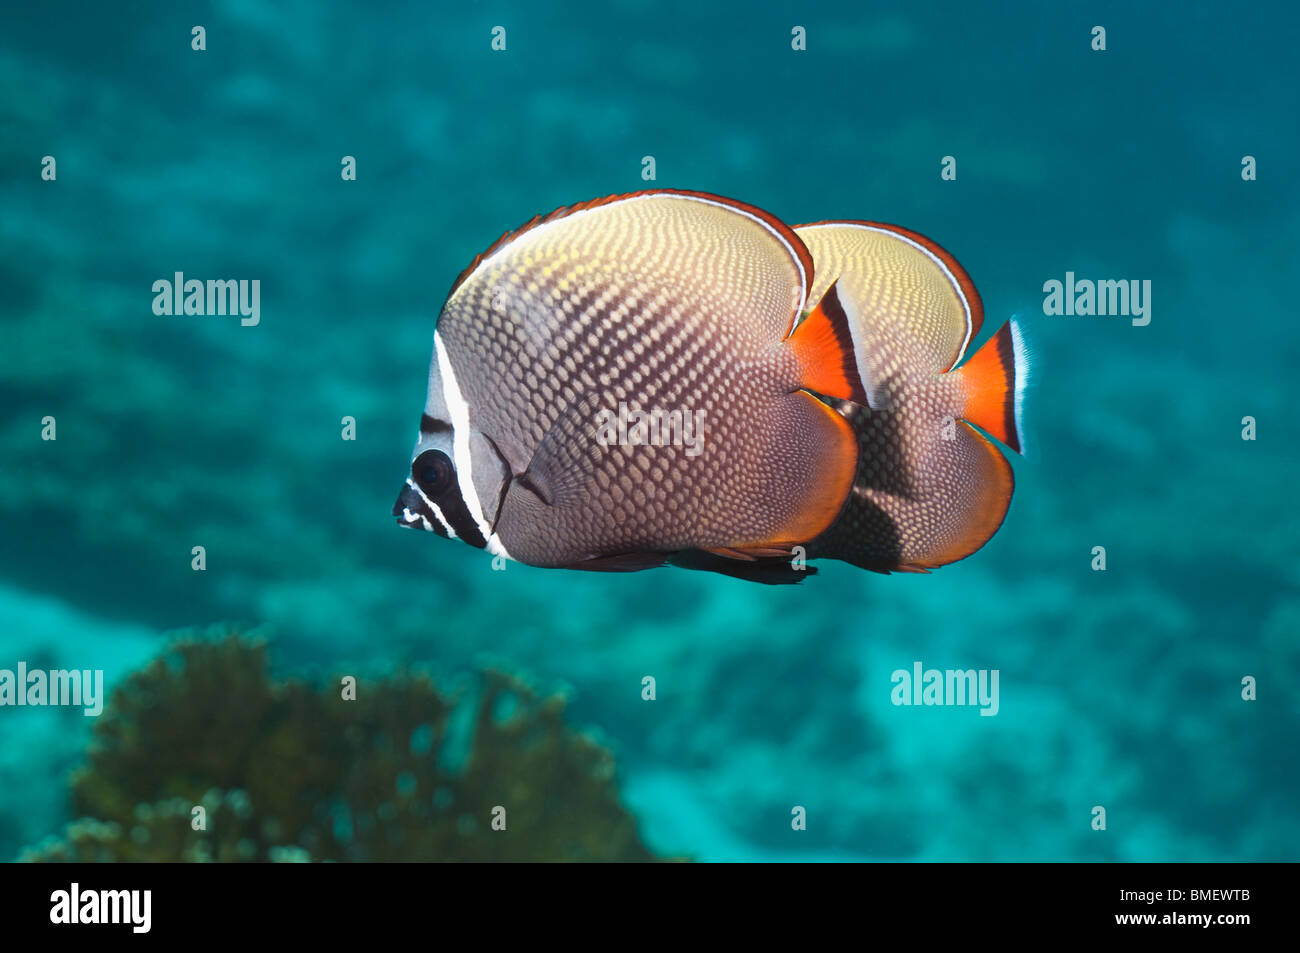 Redtail or Collared butterflyfish.  Andaman Sea, Thailand. Stock Photo